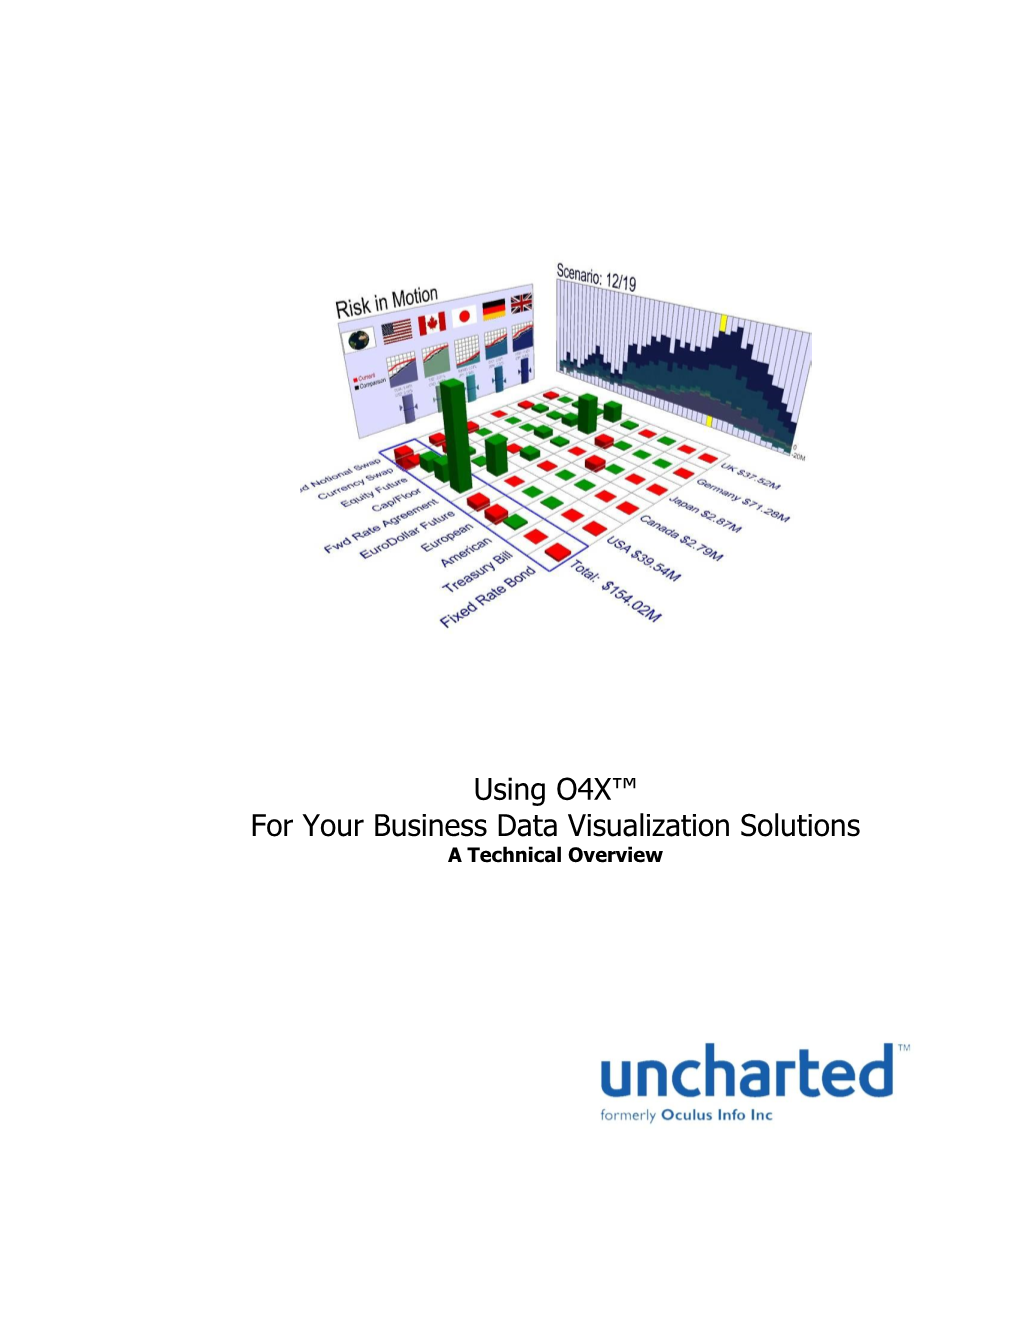 O4X™ for Your Business Data Visualization Solutions a Technical Overview